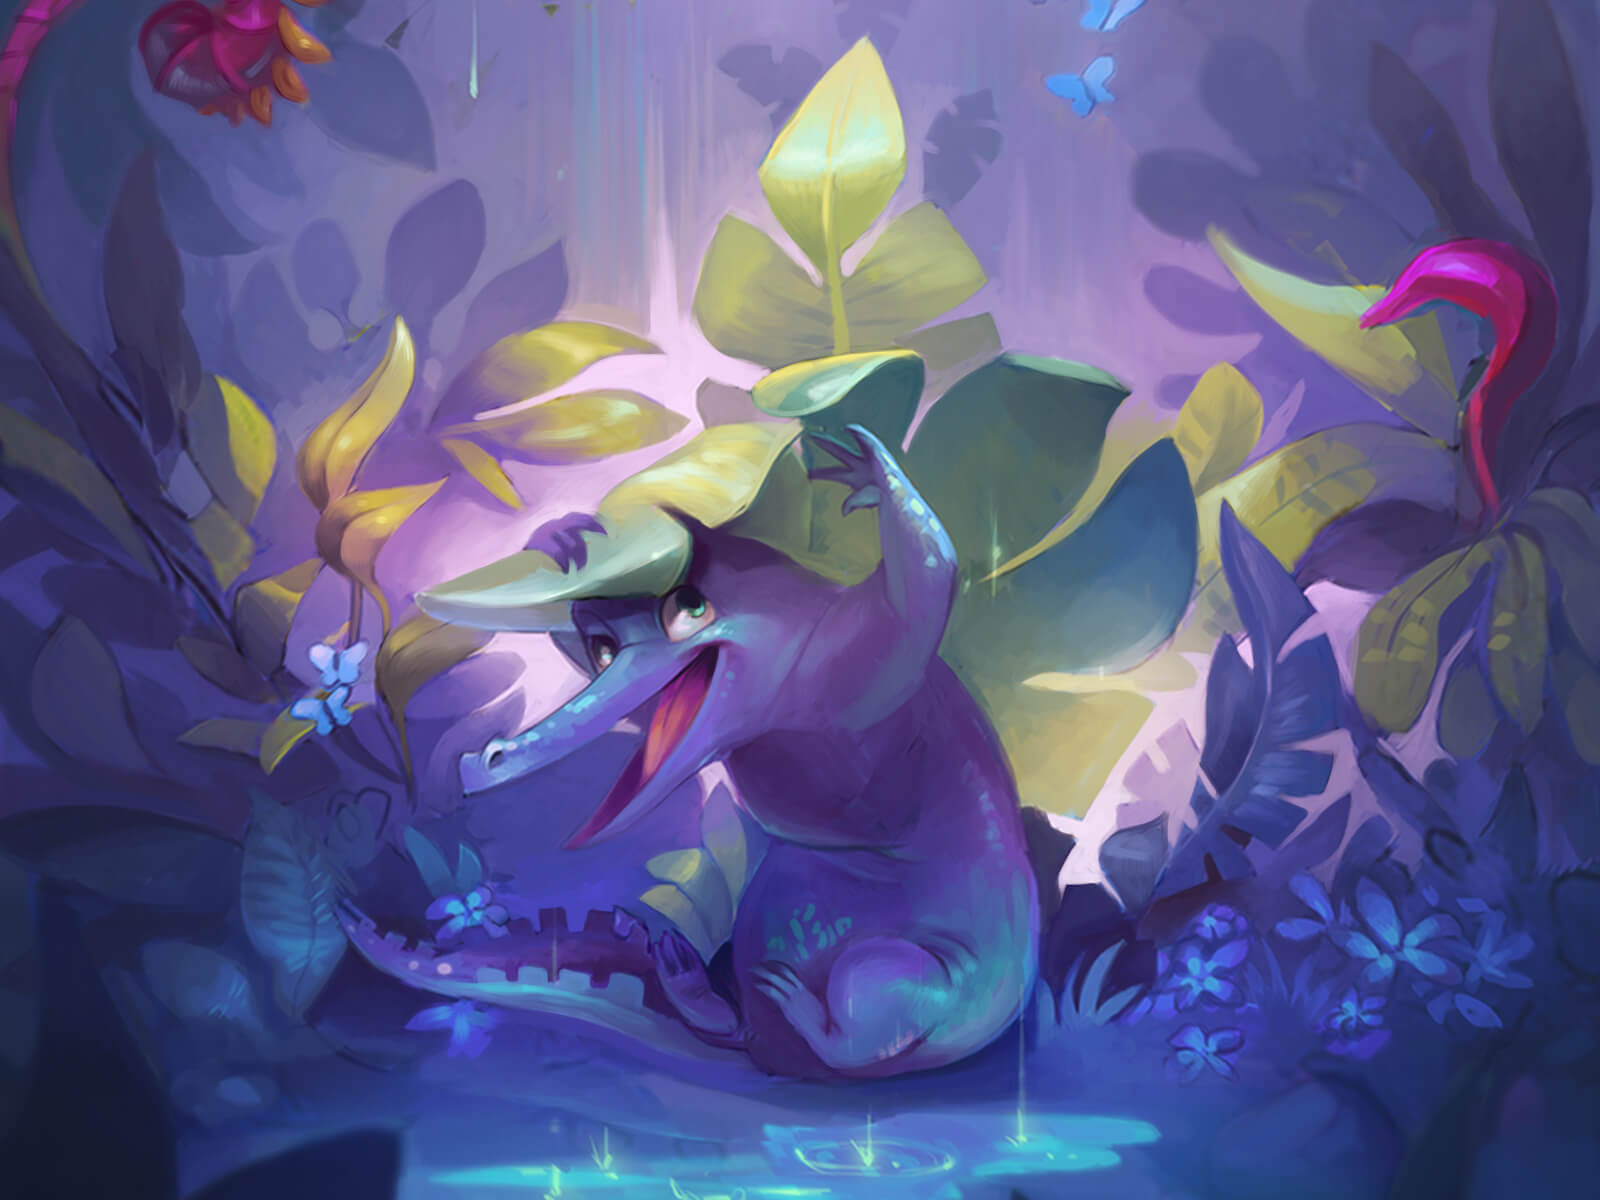 digital painting of a happy purple alligator hiding playfully under a large leaf while a bird flies overhead